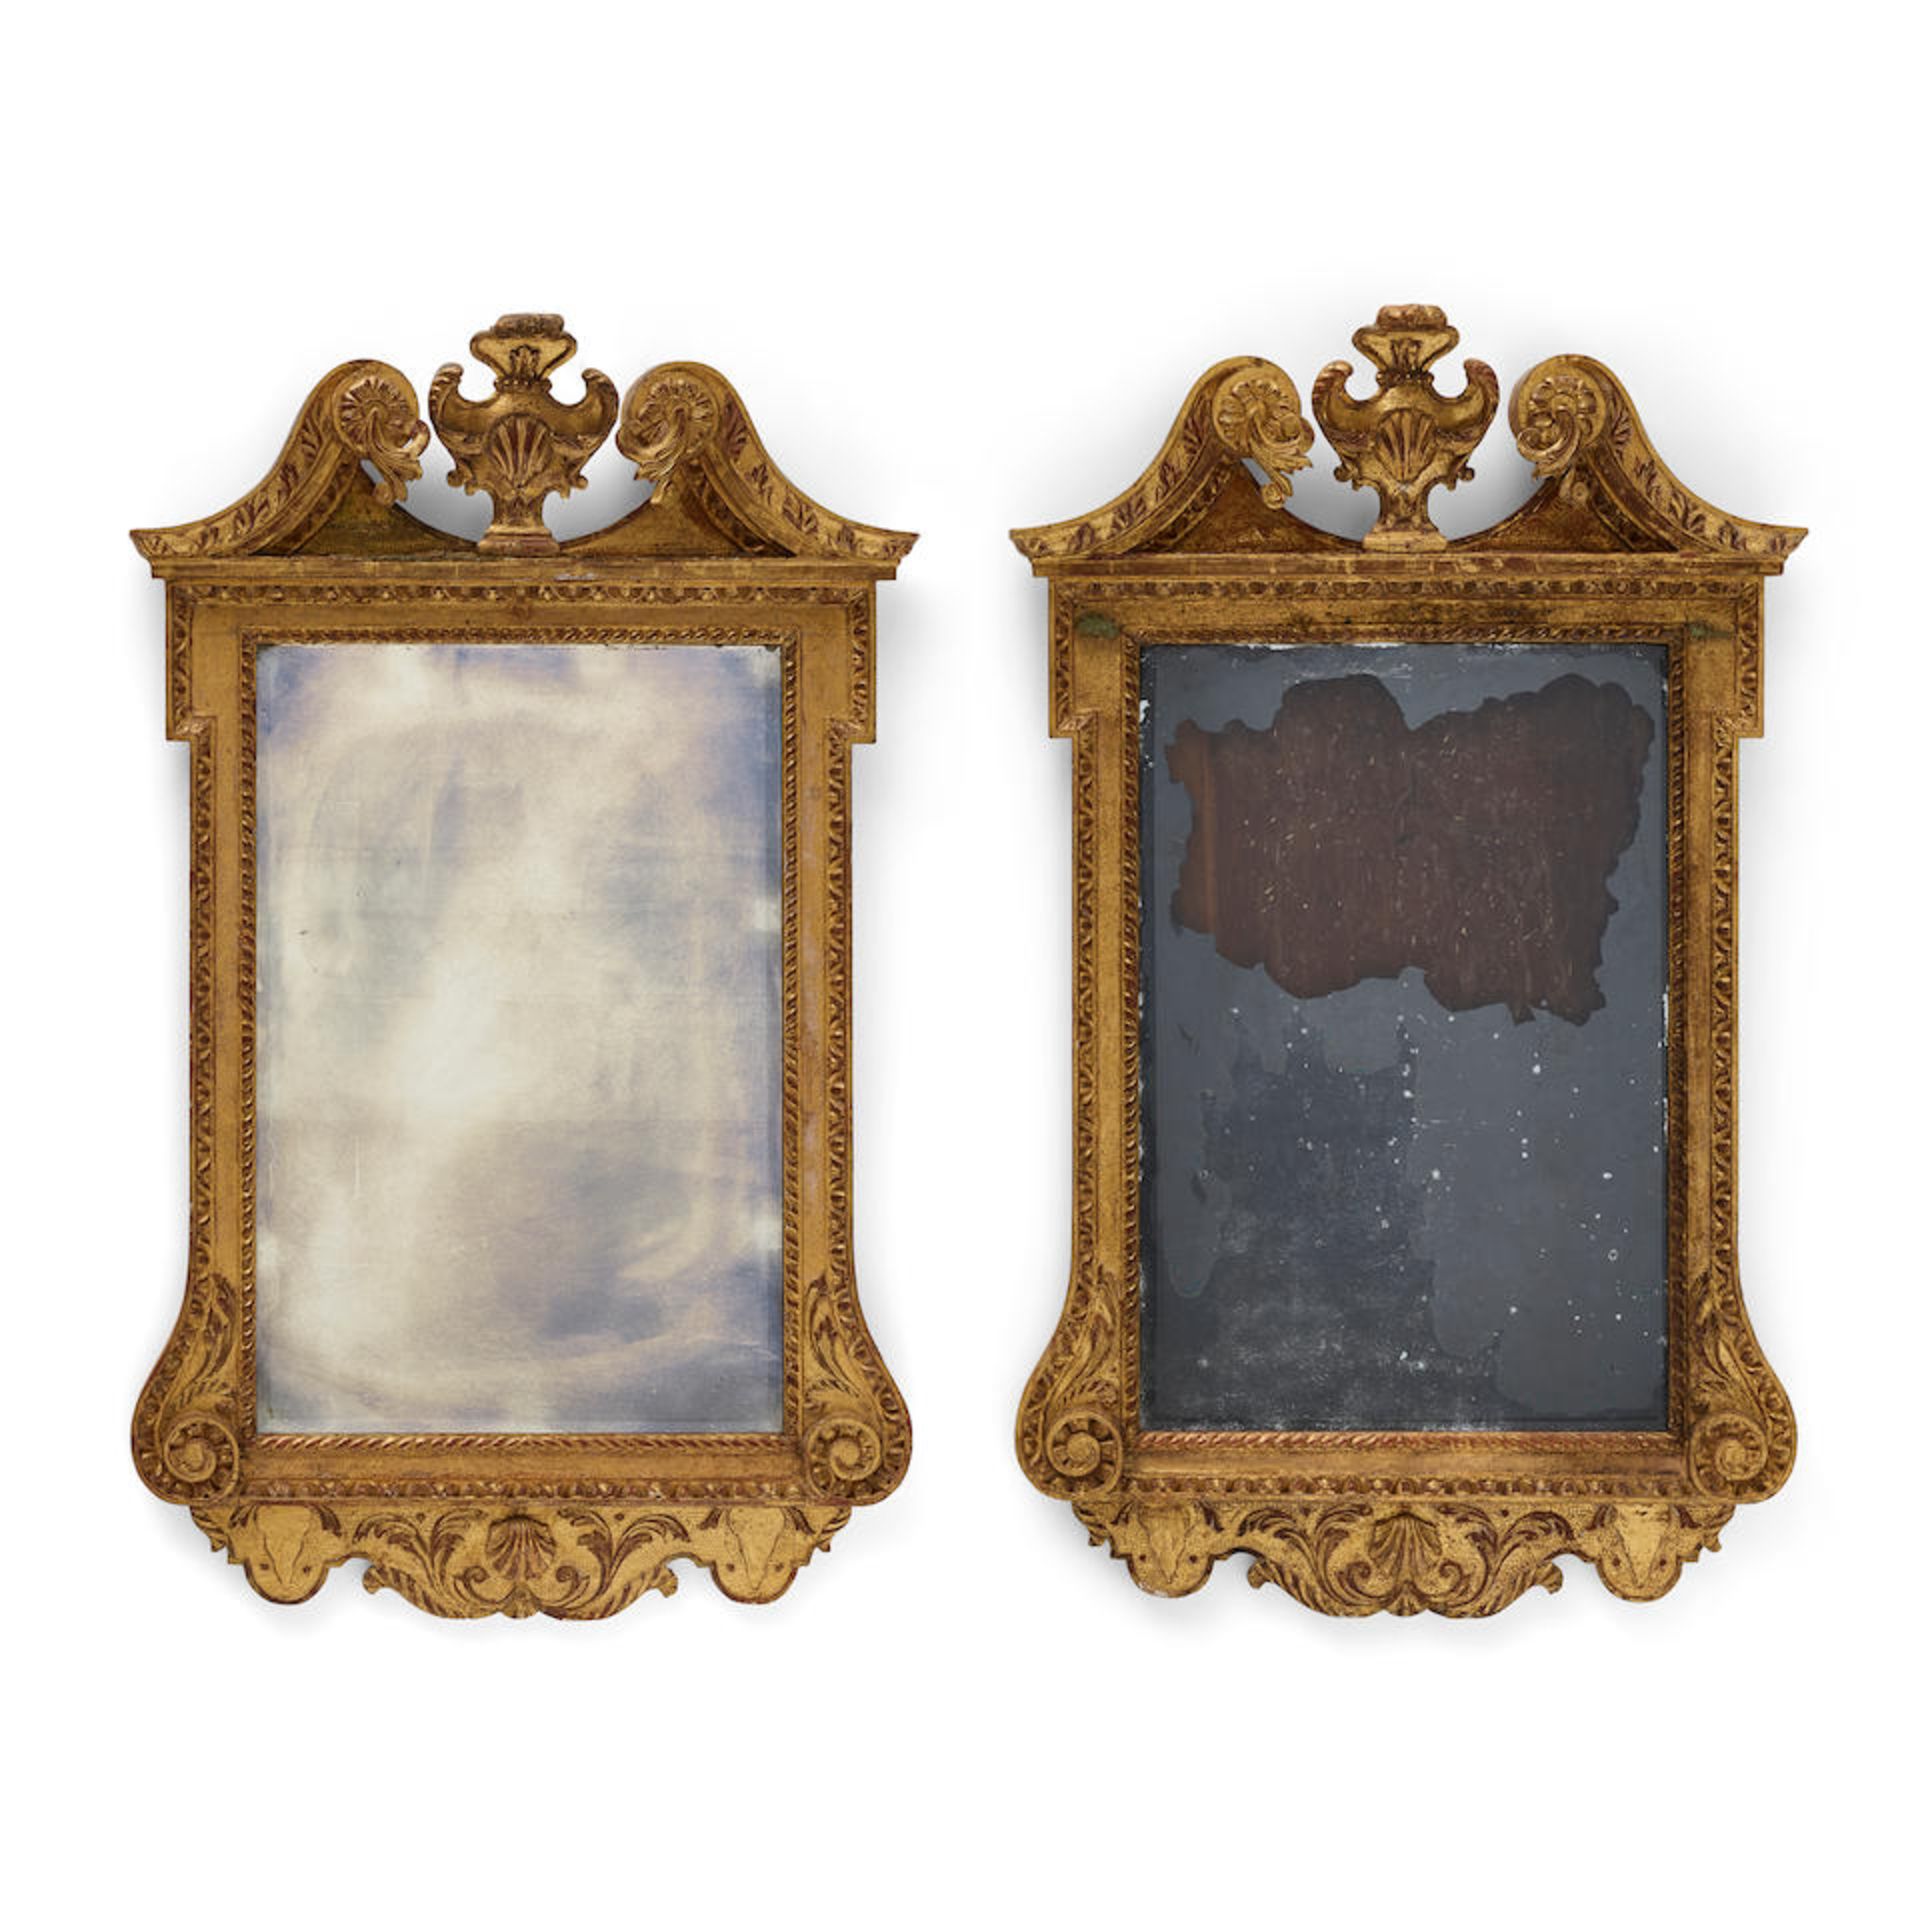 A PAIR OF GEORGE III GILTWOOD MIRRORSLate 18th century